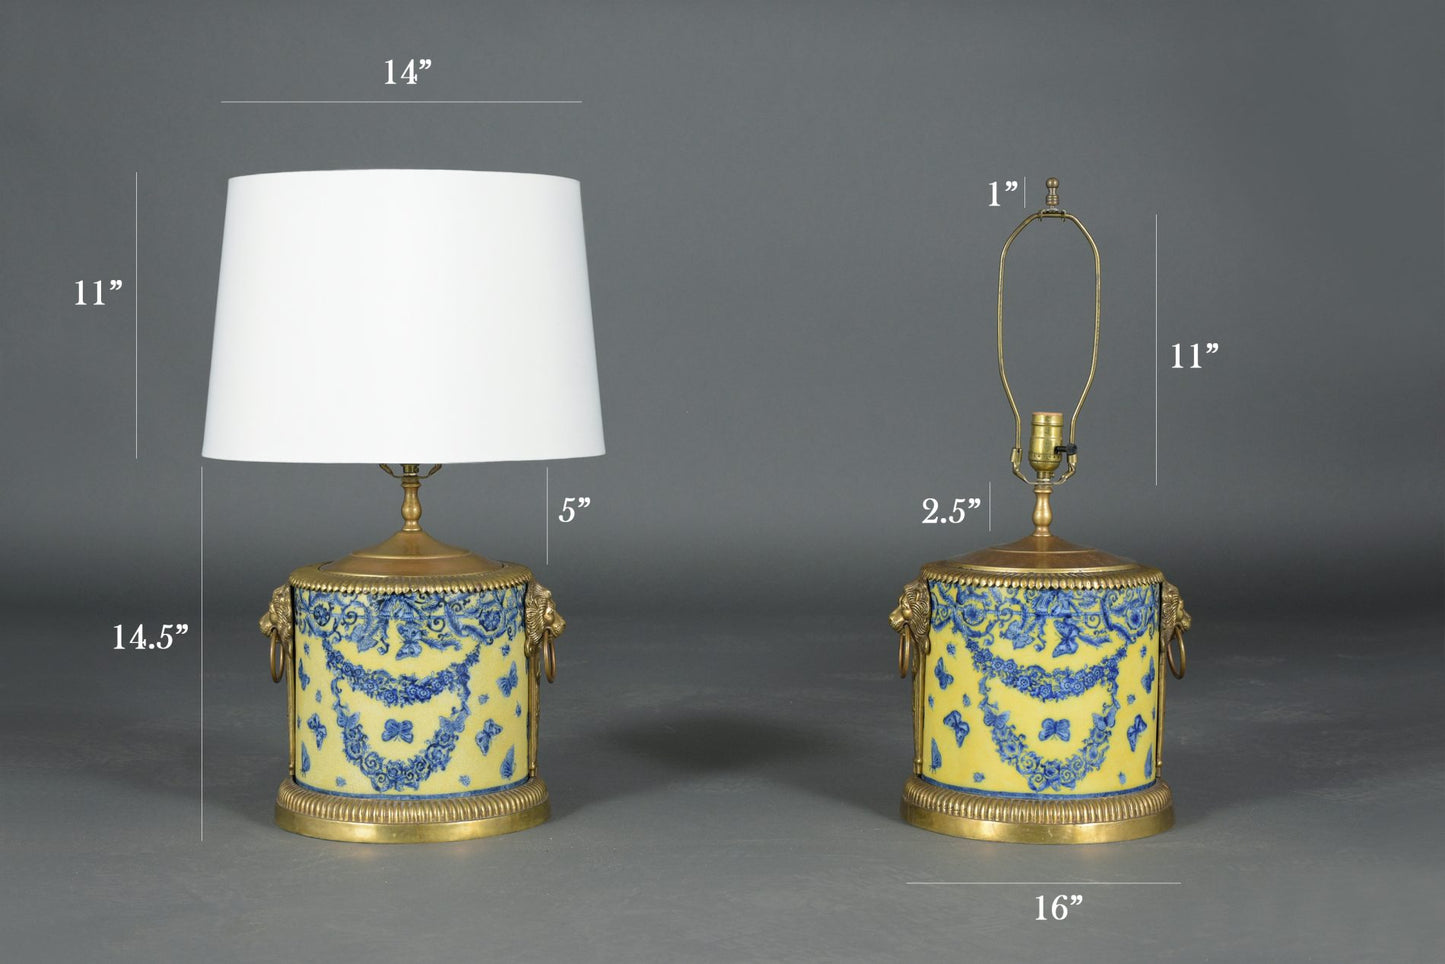 Pair of Chinese Porcelain Table Lamps